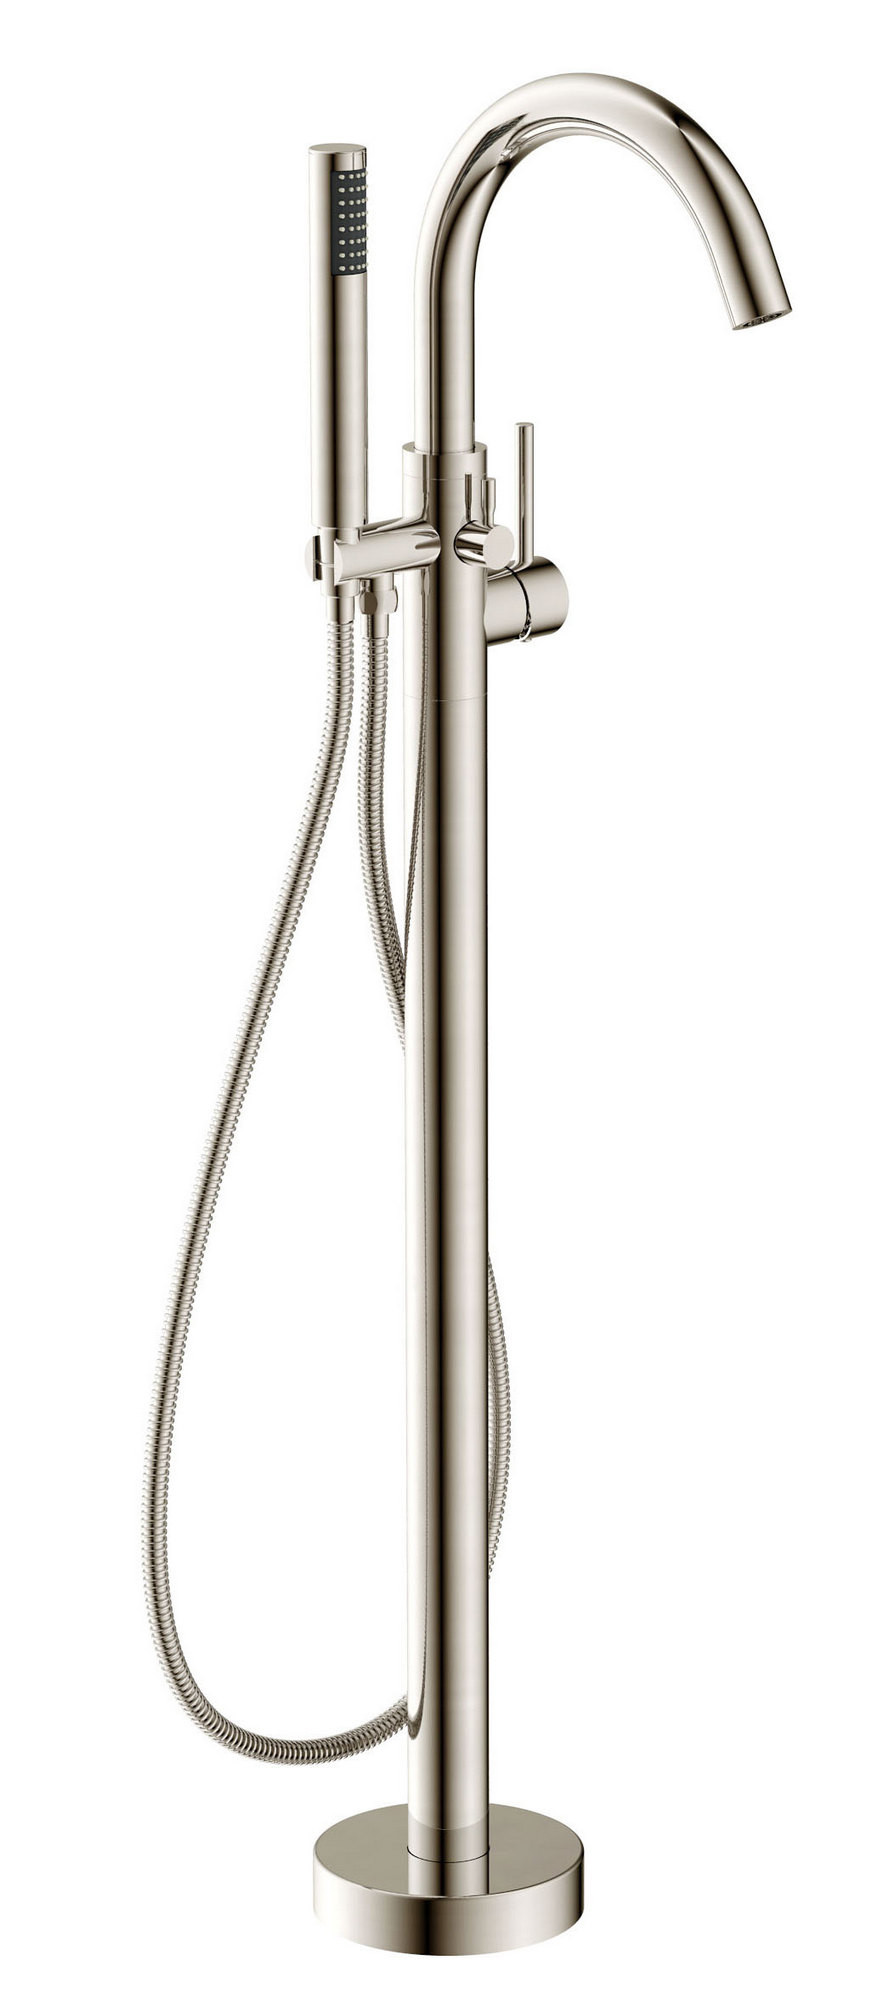 ANZZI FS-AZ0025BN Kros Series Tub Faucet with Hand Shower in Brushed Nickel